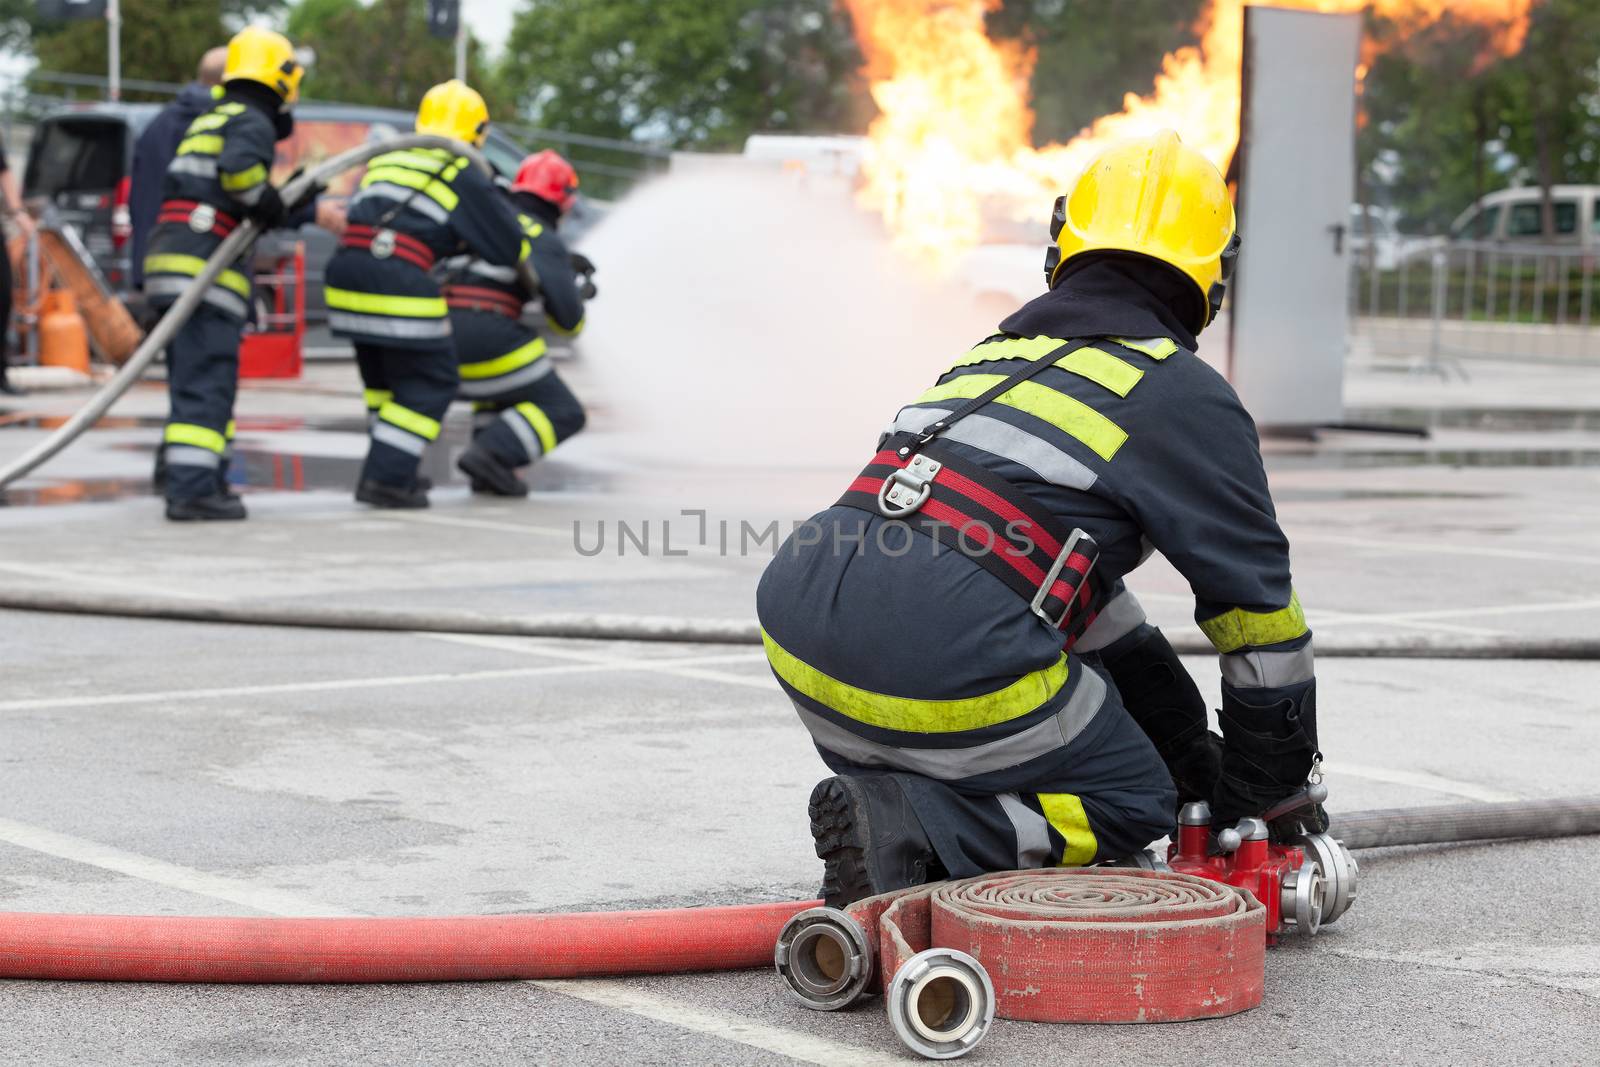 Firefighters spraying water in fire fighting training operation